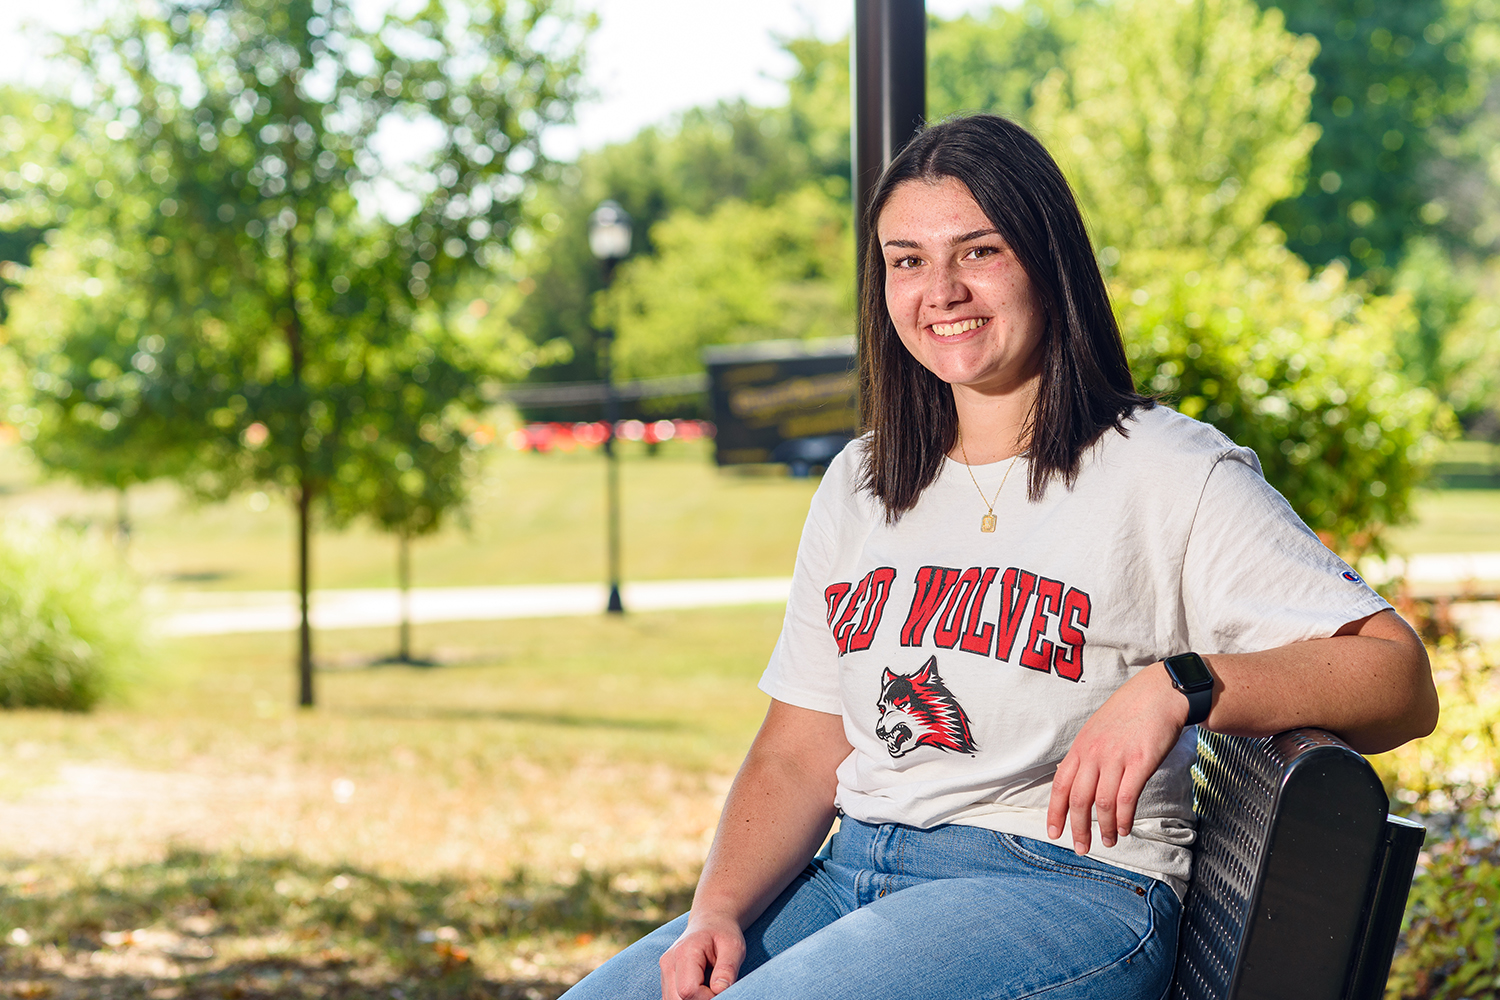 IU East student wearing a Red Wolves tee shirt seated on a bench on campus.